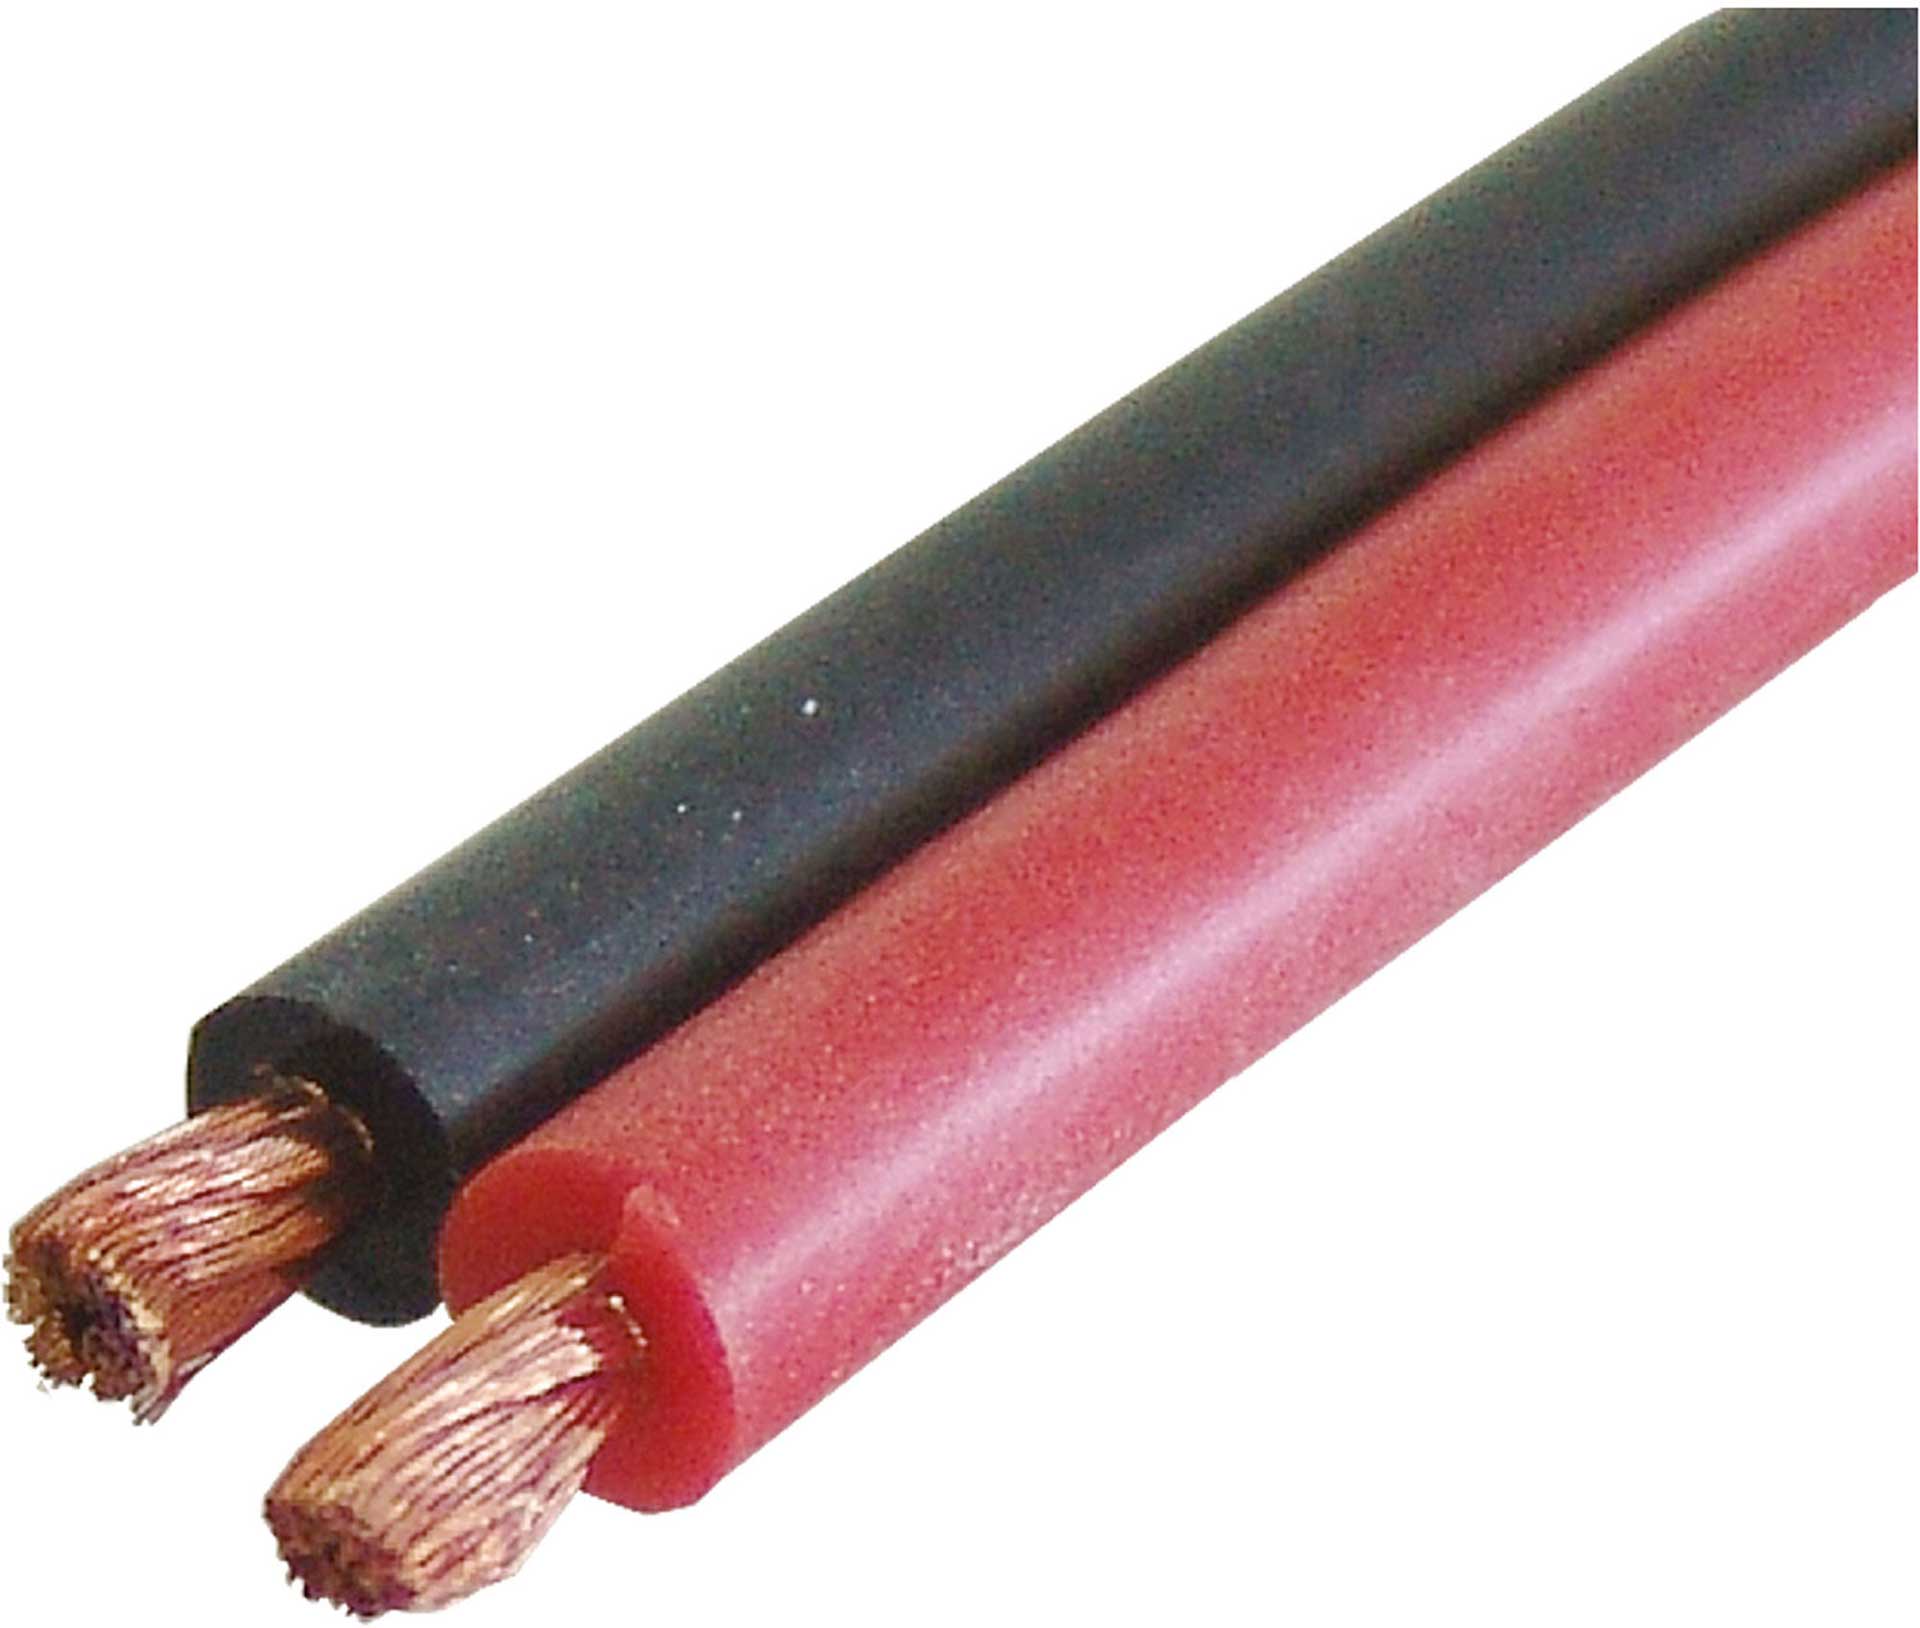 MODELLBAU LINDINGER SILICONE CABLE 1,5MM² RED / BLACK JE 1M